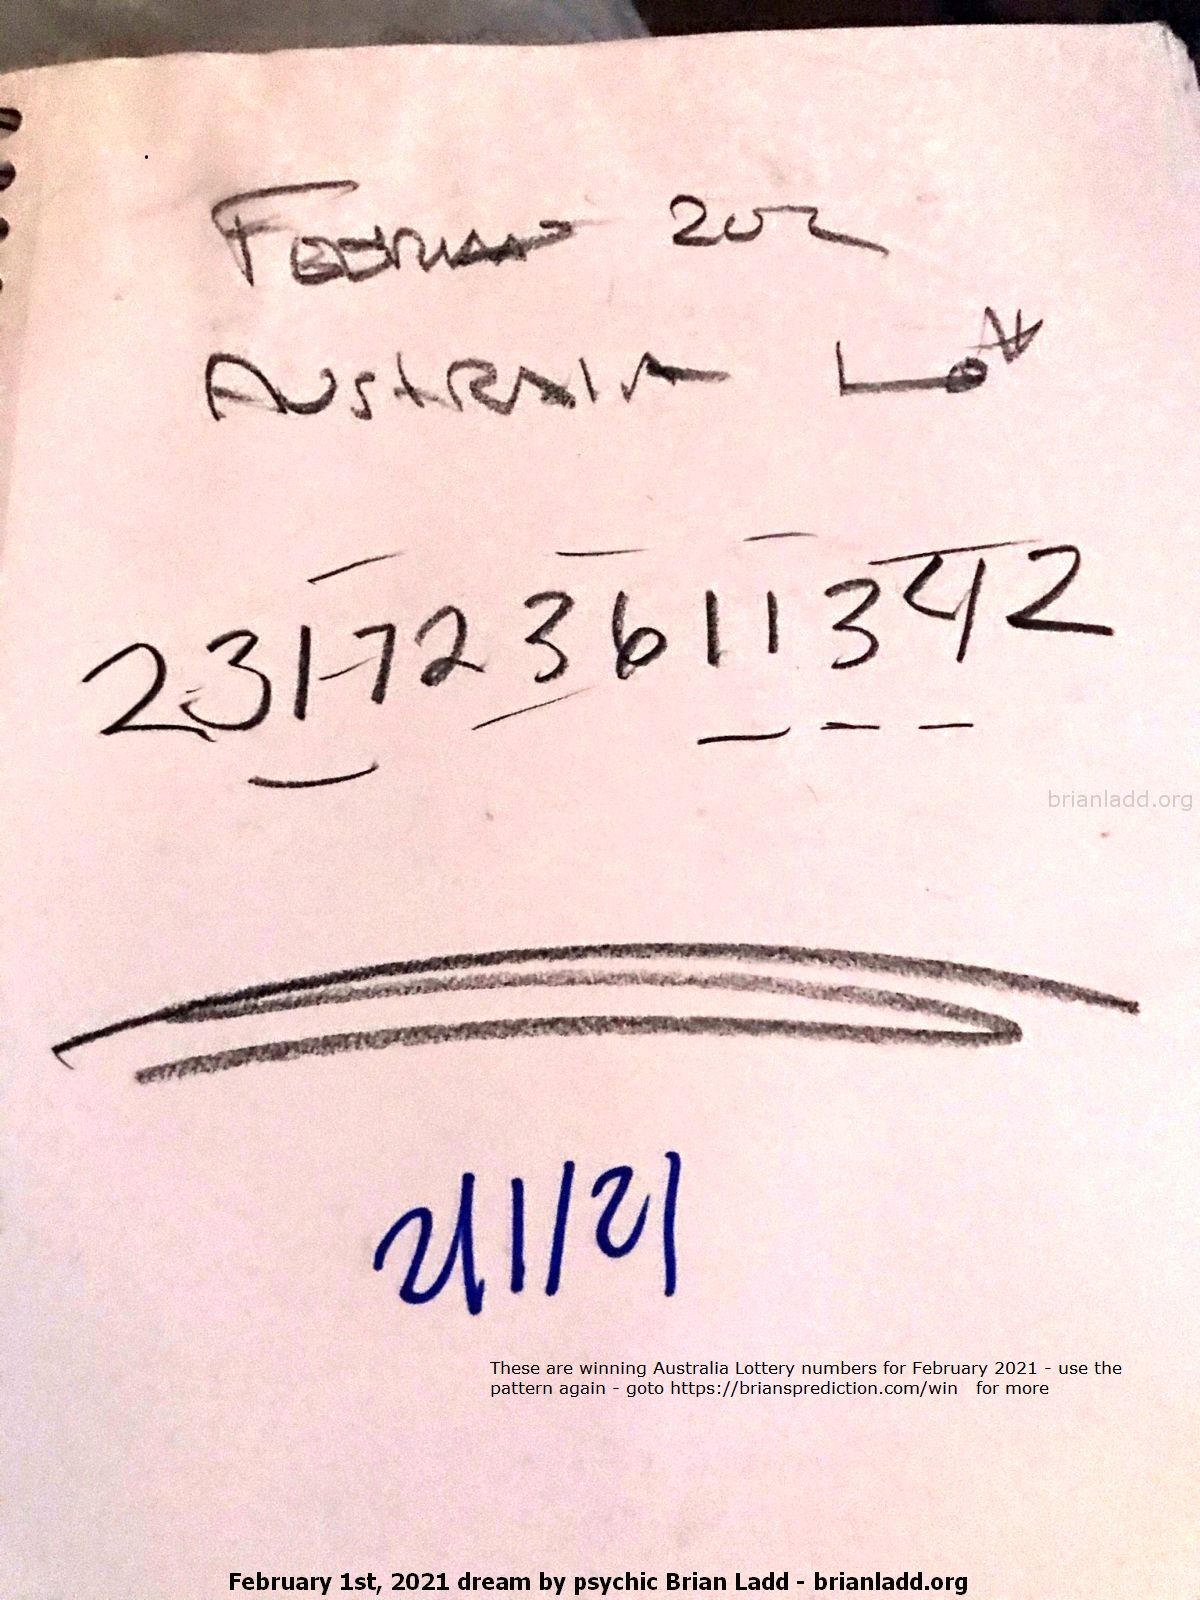 14391 1 February 2021 3 - These Are Winning Australia Lottery Numbers For February 2021 - Use The Pattern Again - Goto ...
These Are Winning Australia Lottery Numbers For February 2021 - Use The Pattern Again - Goto  https://briansprediction.com/Win For More  ( NEW!  Free lottery picks by mail, I will personally fill out your blank lottery sheet and mail it back to you for free, postage is included!  visit  https://briansprediction.com/picksbymail   )
